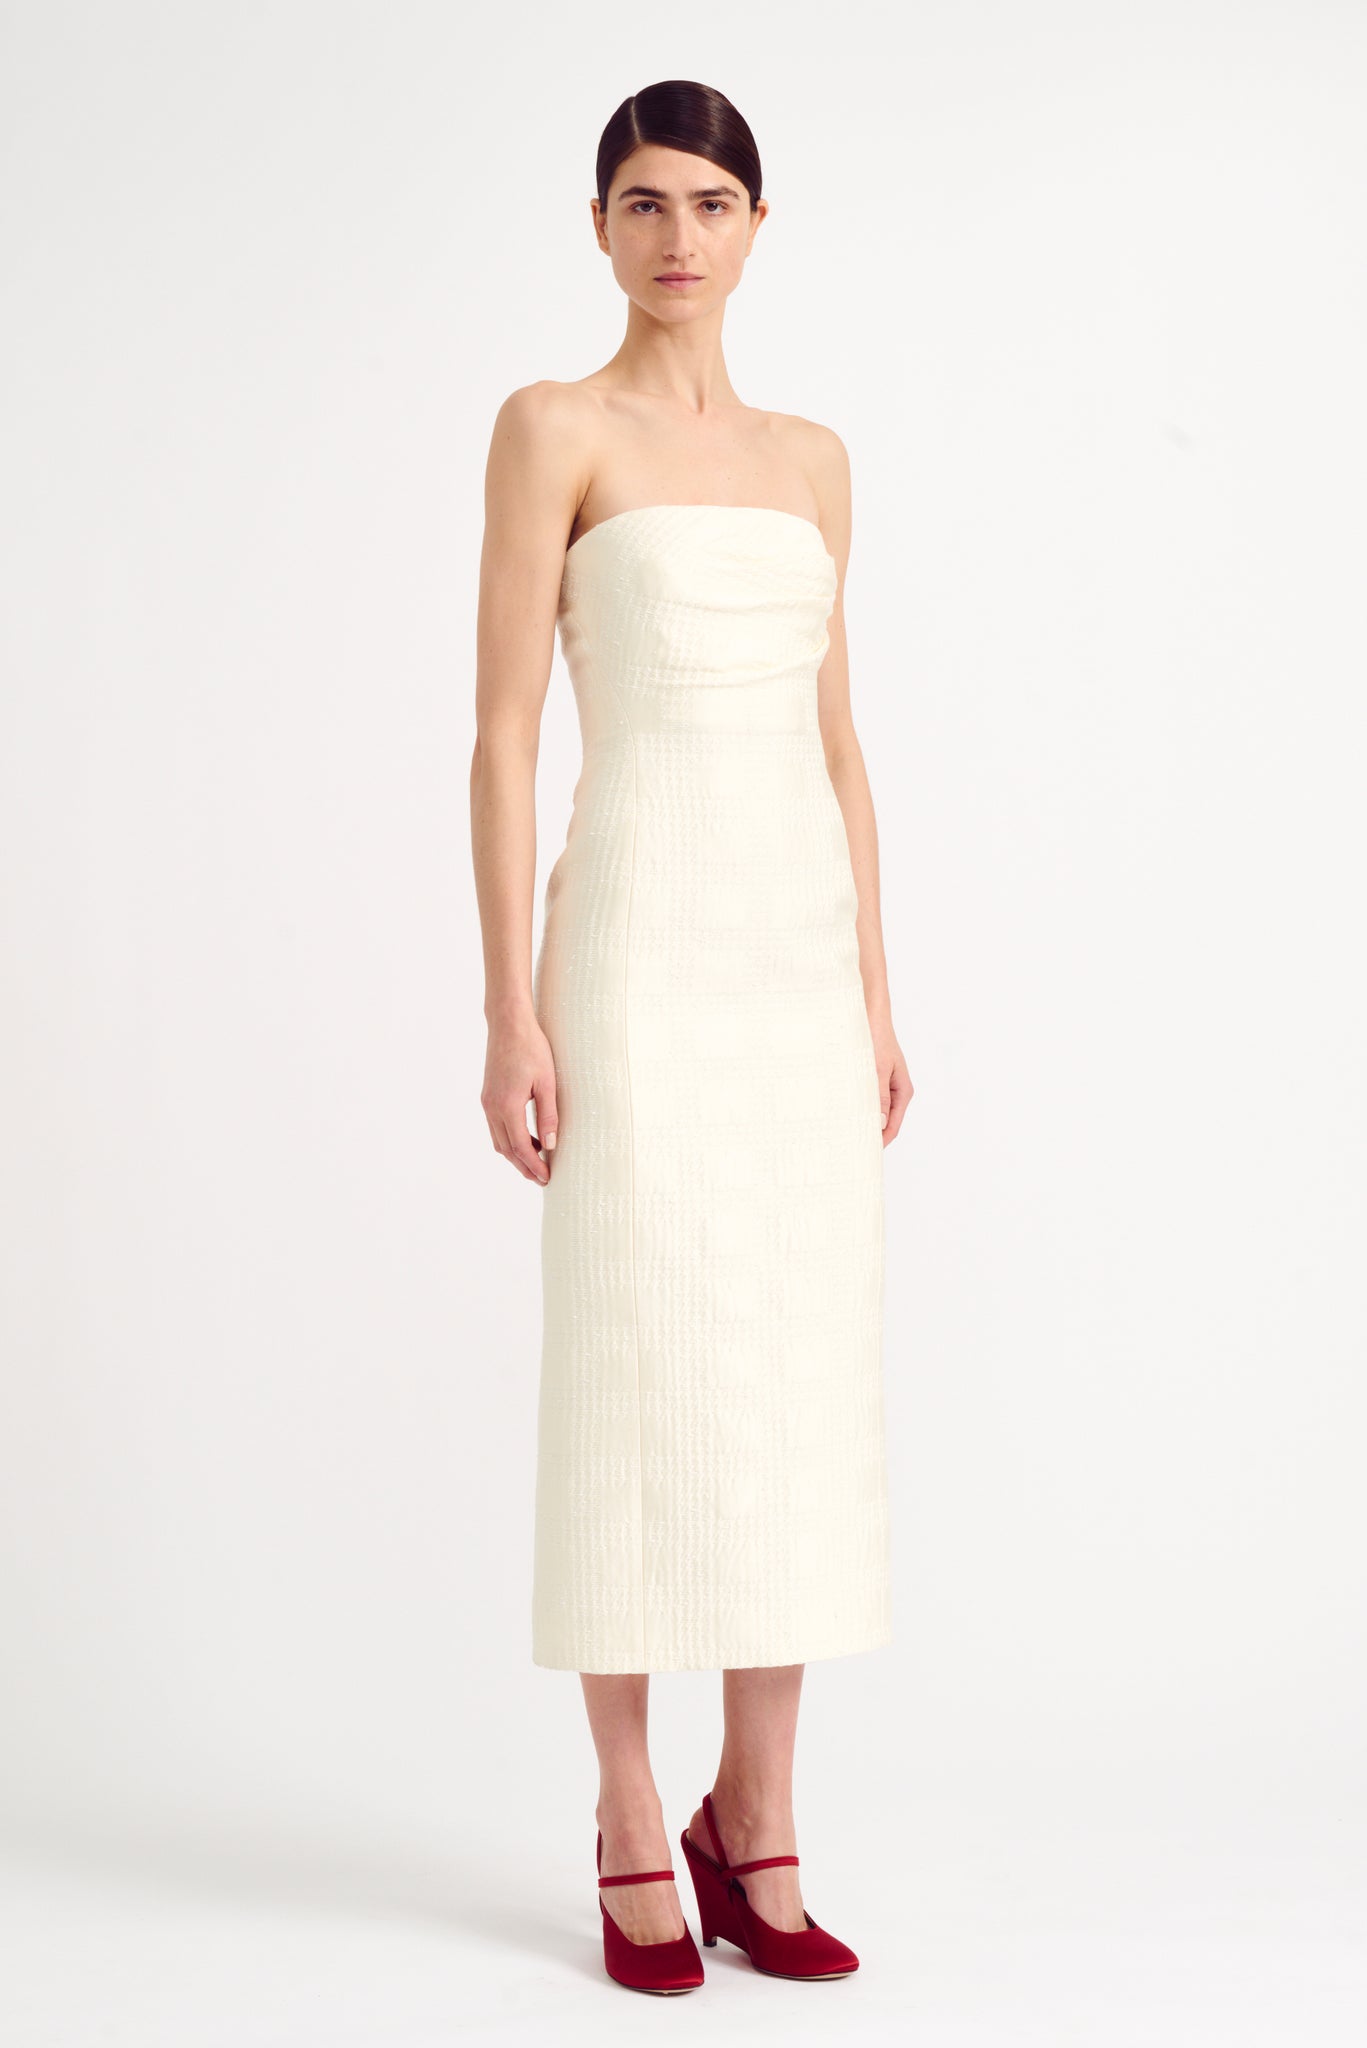 Lowre Strapless Dress in Check Ivory Tweed | Emilia Wickstead